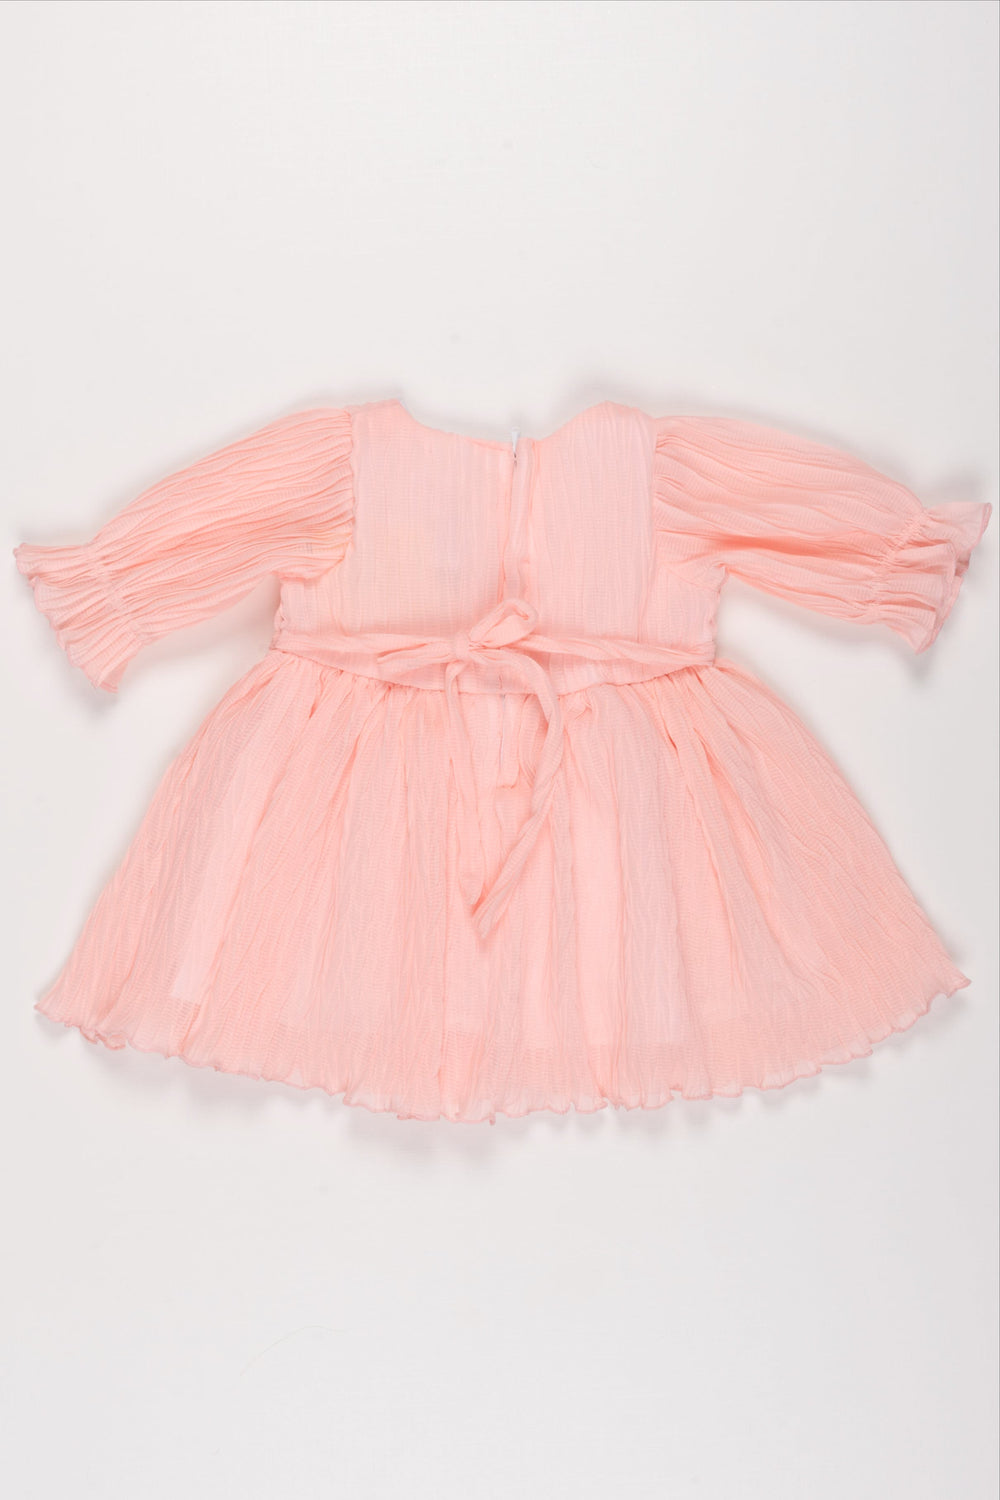 The Nesavu Baby Fancy Frock Girls Delicate Pink Pleated Tulle Dress with Floral Embellishment Nesavu Delicate Pink Pleated Dress for Girls | Floral & Beaded Detail | The Nesavu